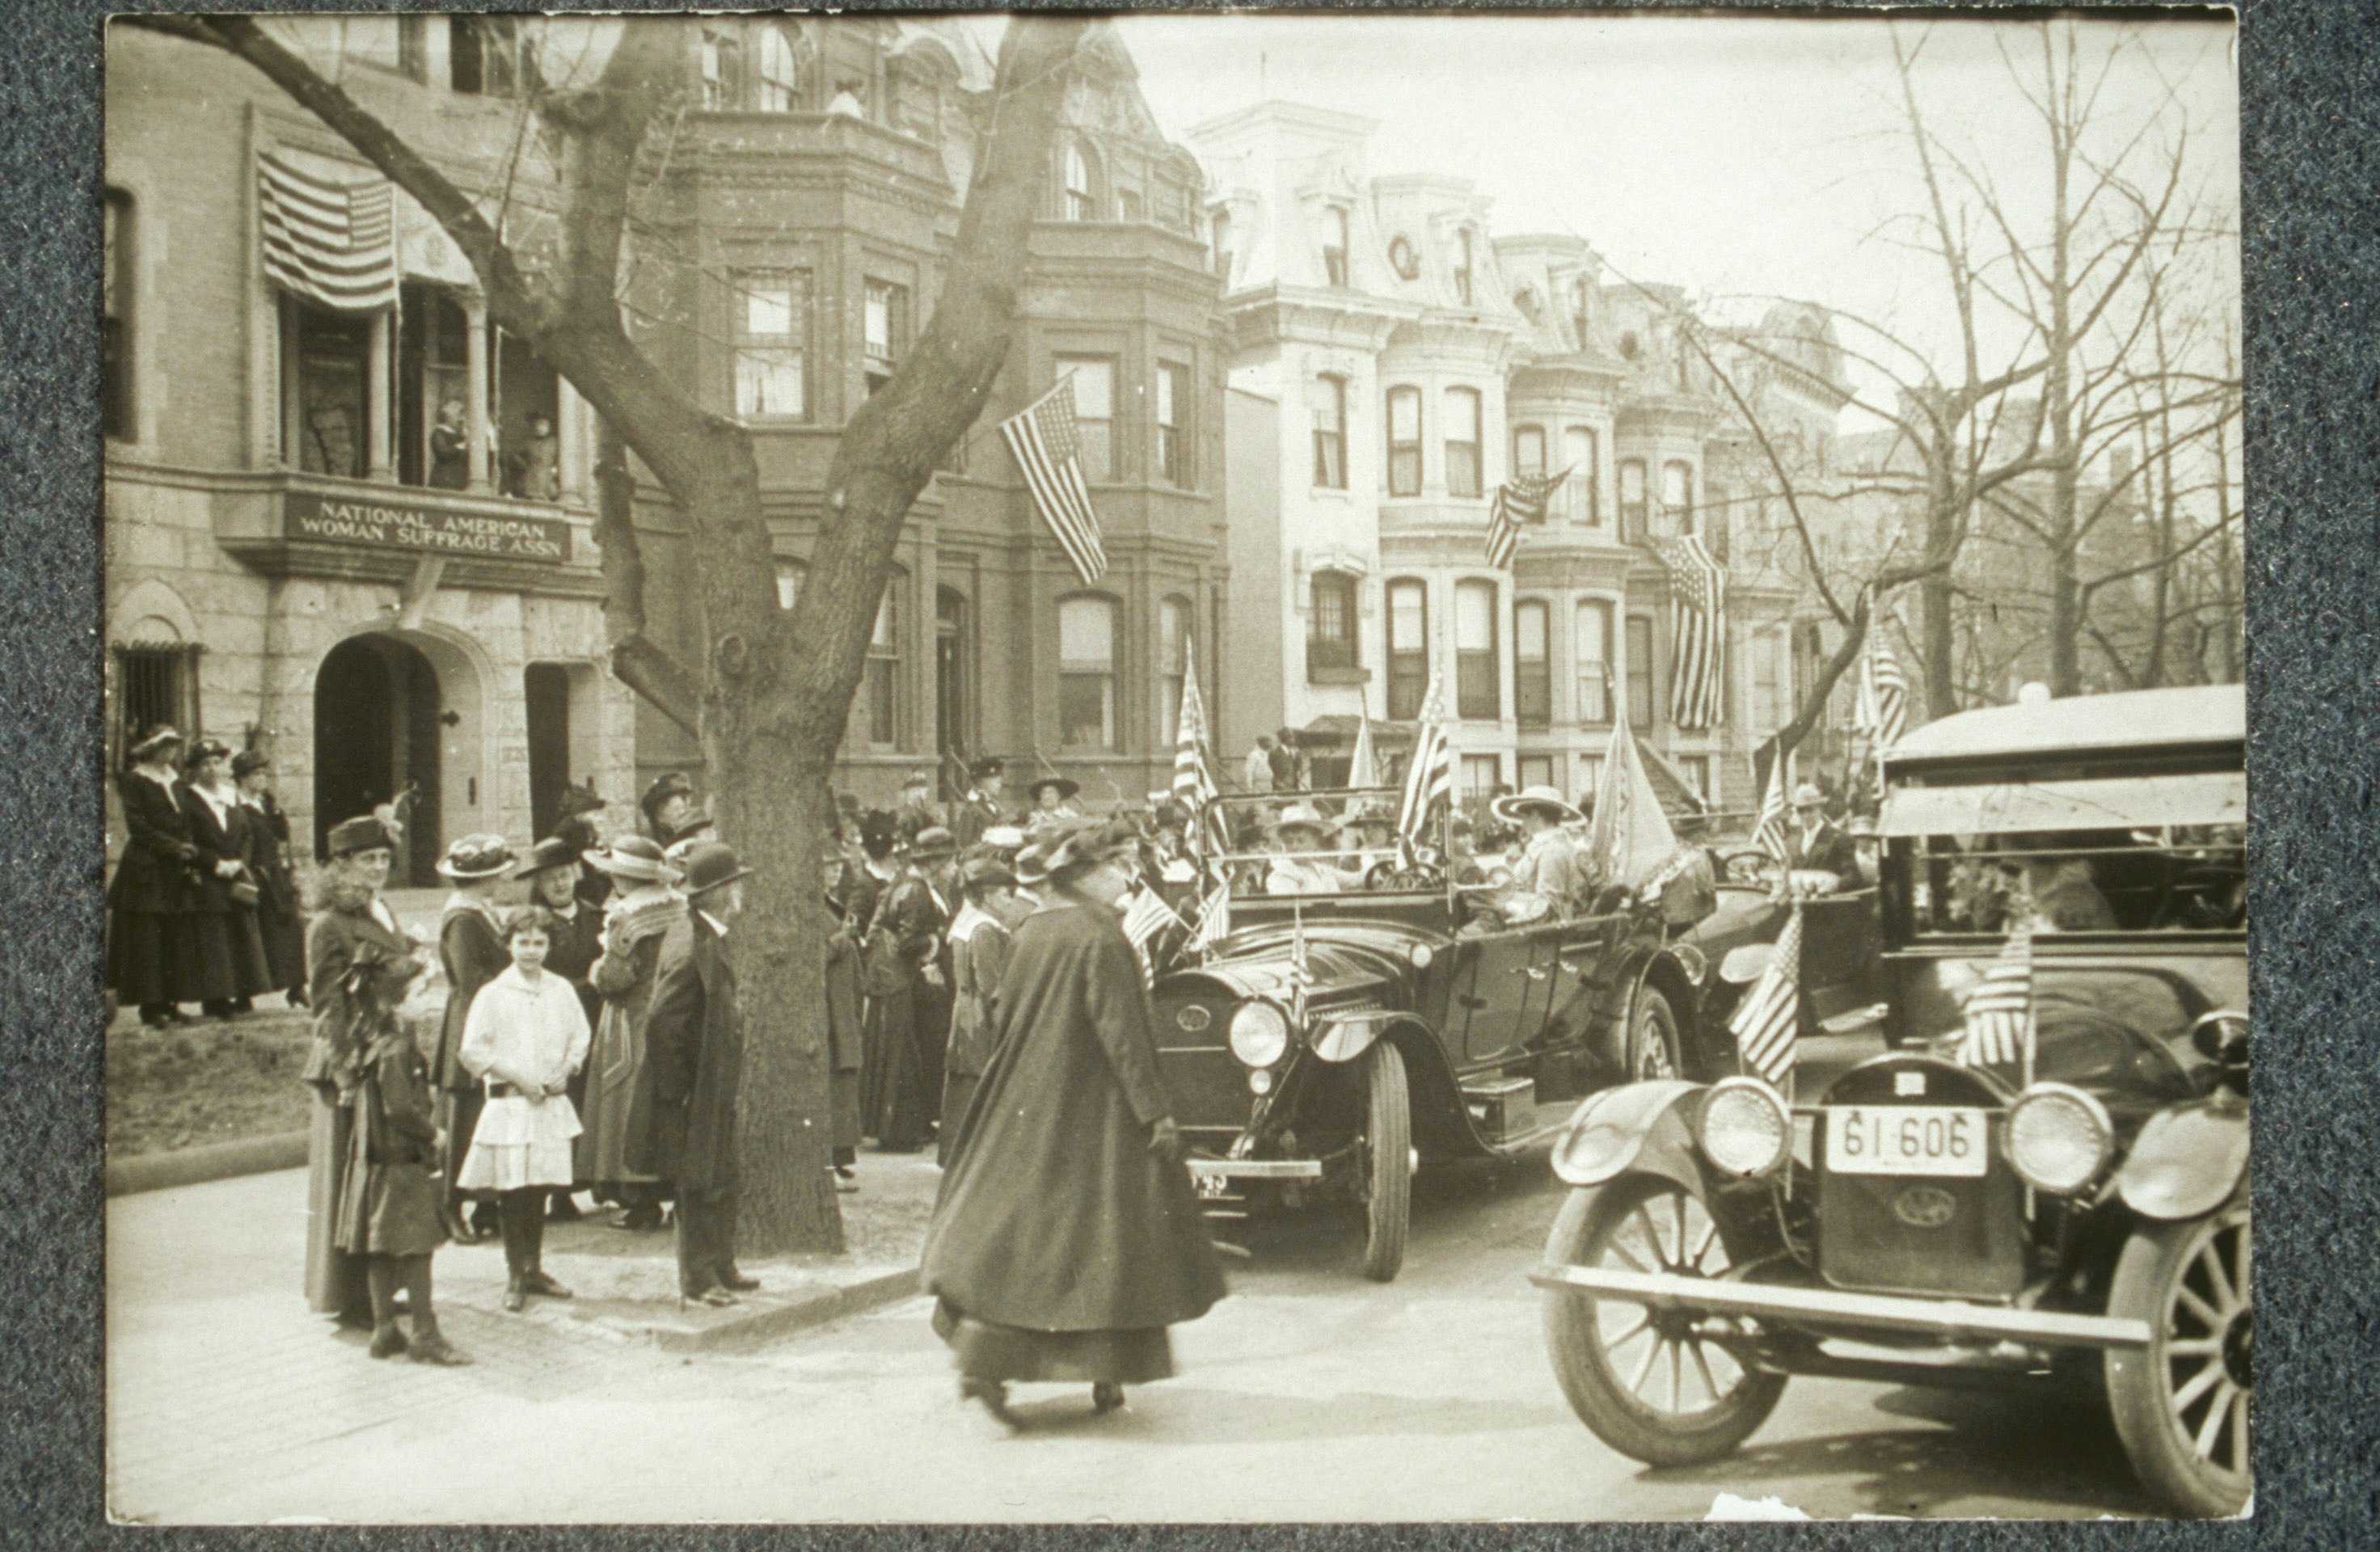 Gathering in front of the National American Woman Suffrage Association headquarters on the arrival of Jeannette Rankin in Washington as the first U. S. Congresswoman